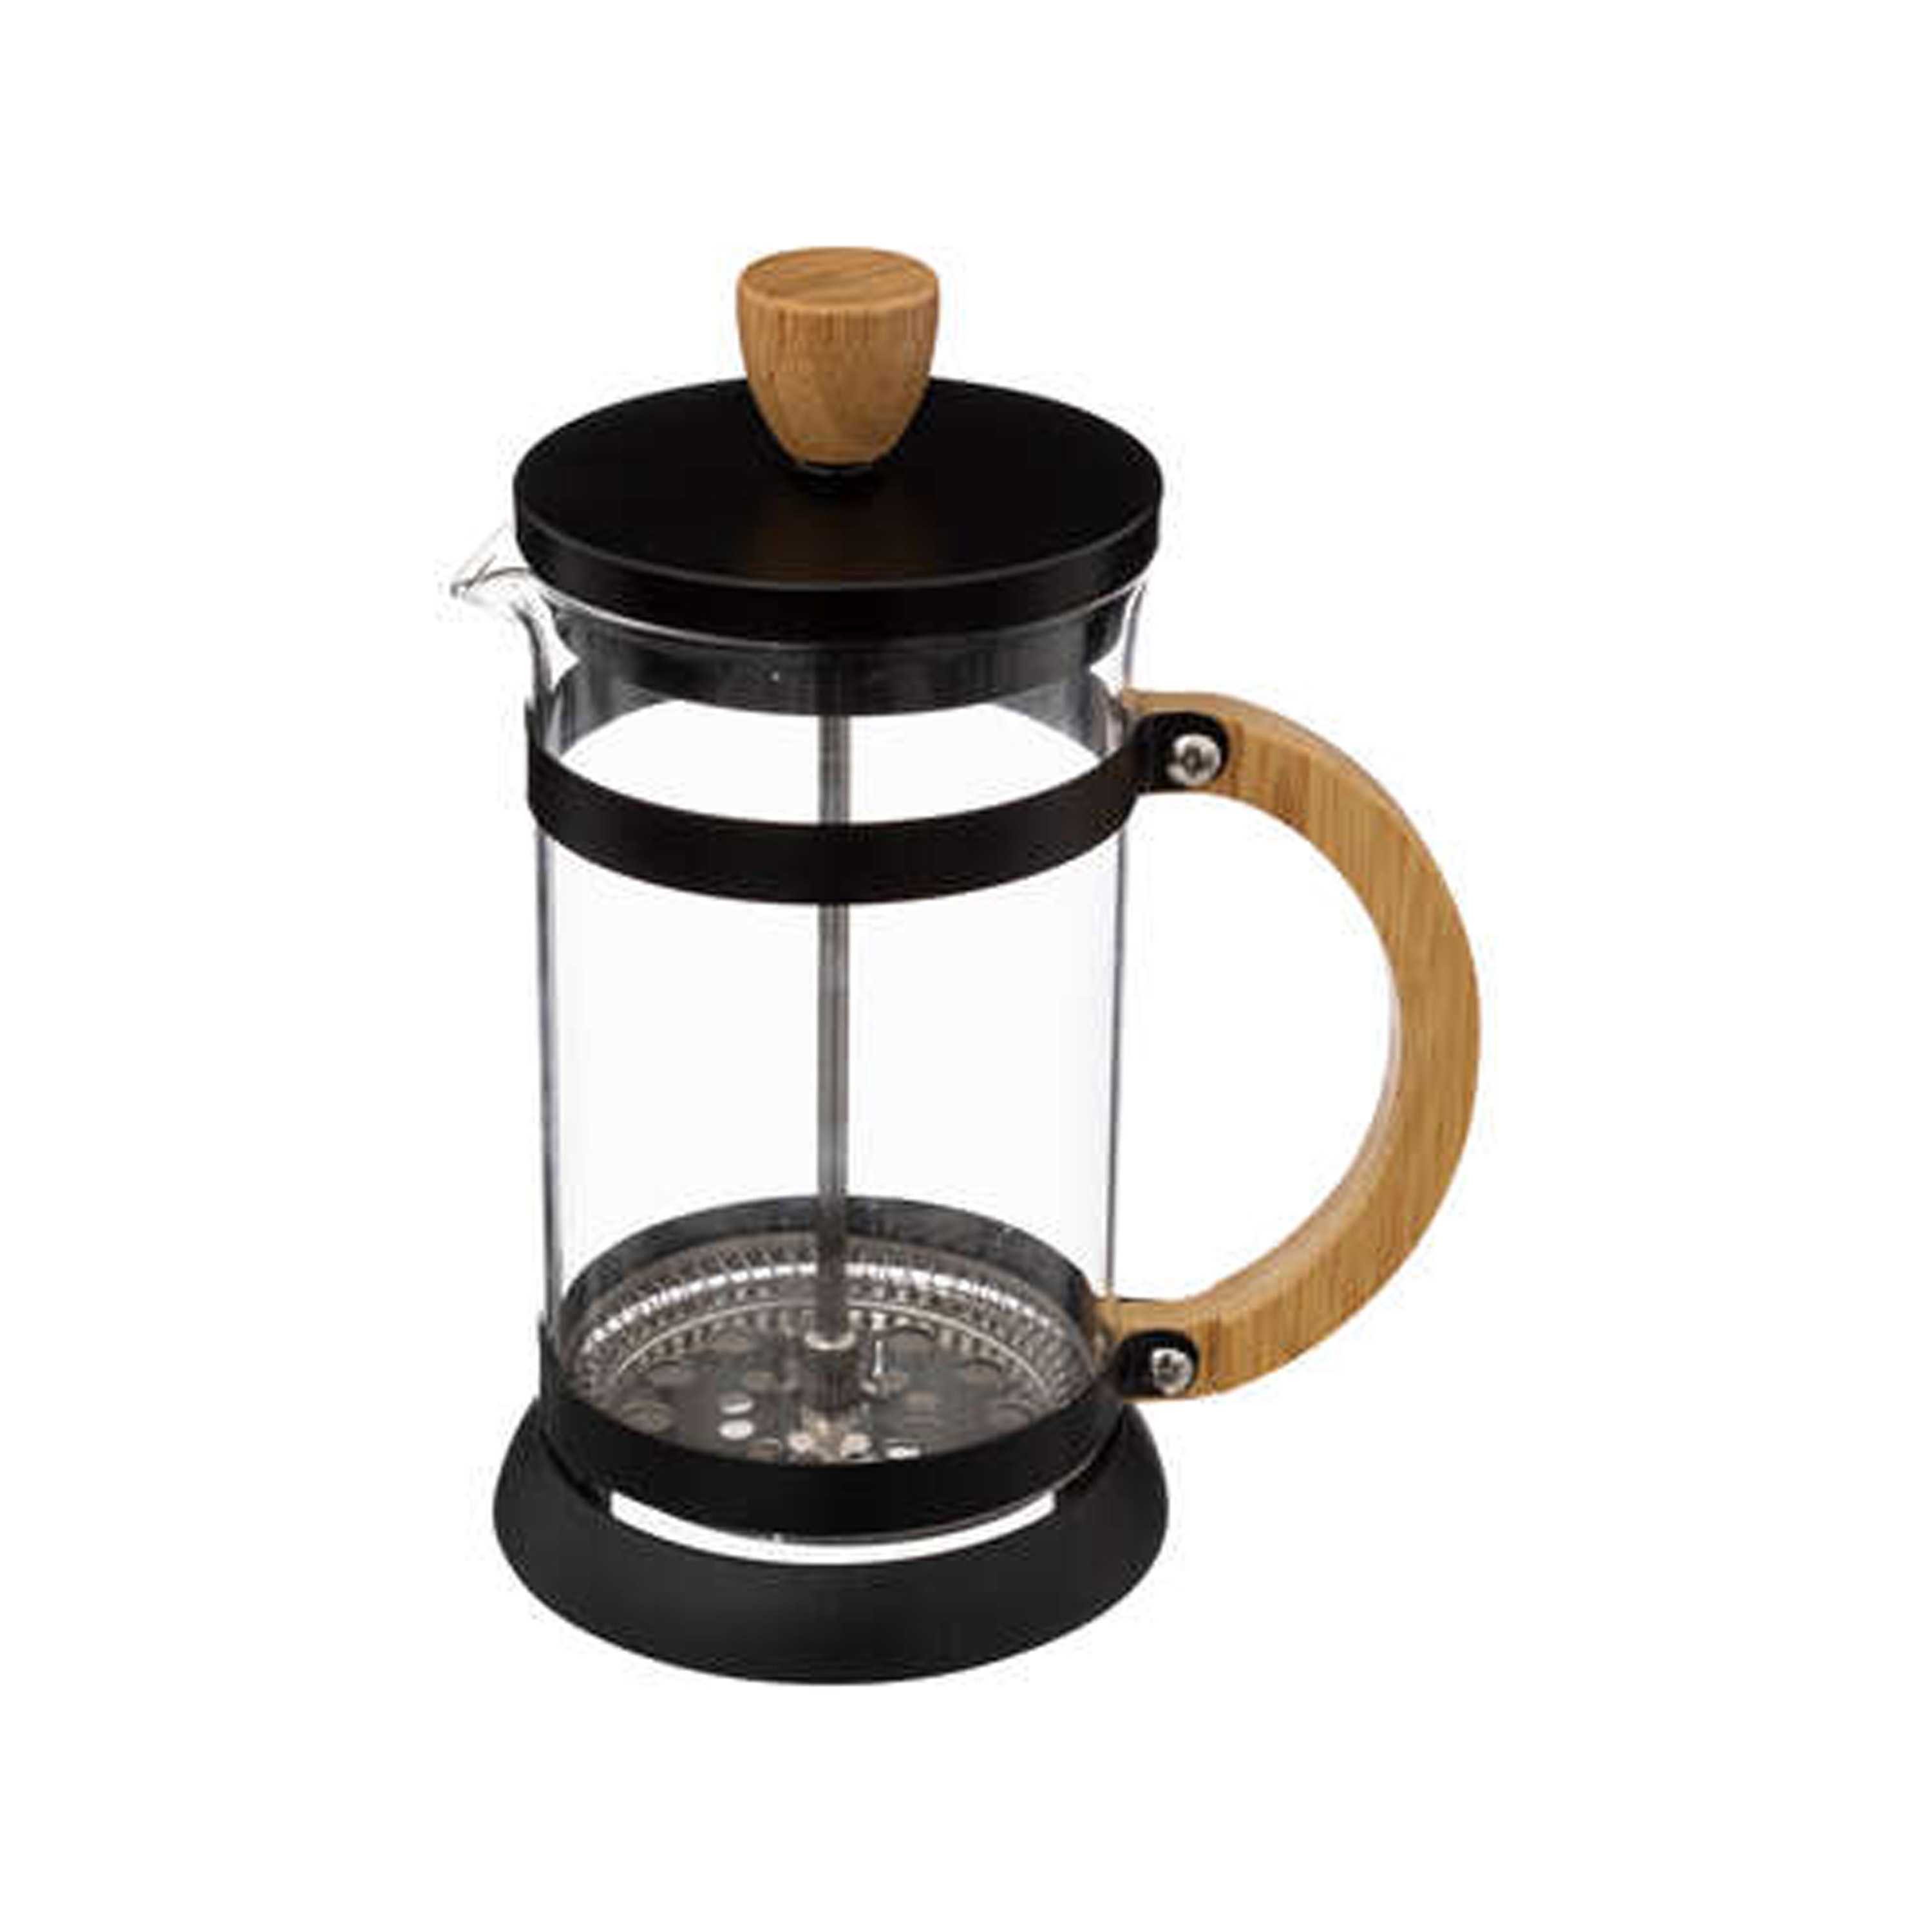 5Five Cafetiere French Press koffiezetter koffiemaker pers 600 ml glas-rvs